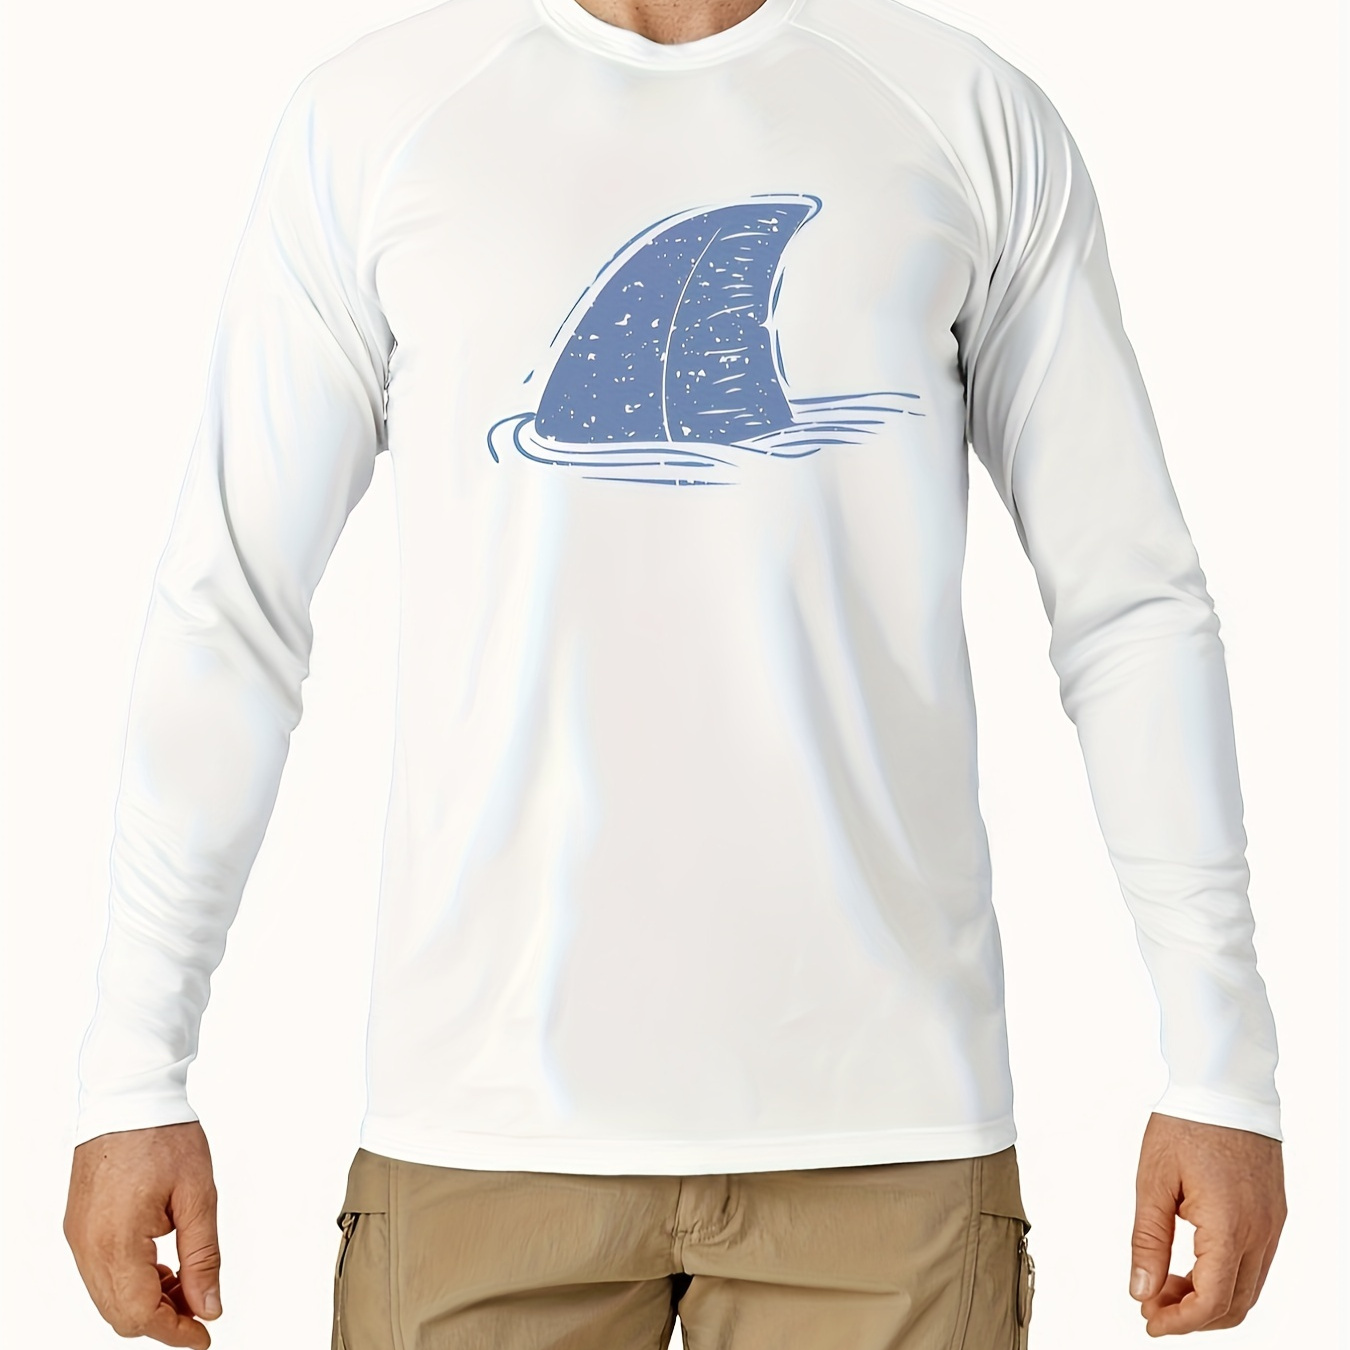 

Men's Long Sleeve Fishing Shirt, Sport Style, Uv Protection, Quick-dry, Moisture-wicking Performance Tee With Sailfish Graphic Design